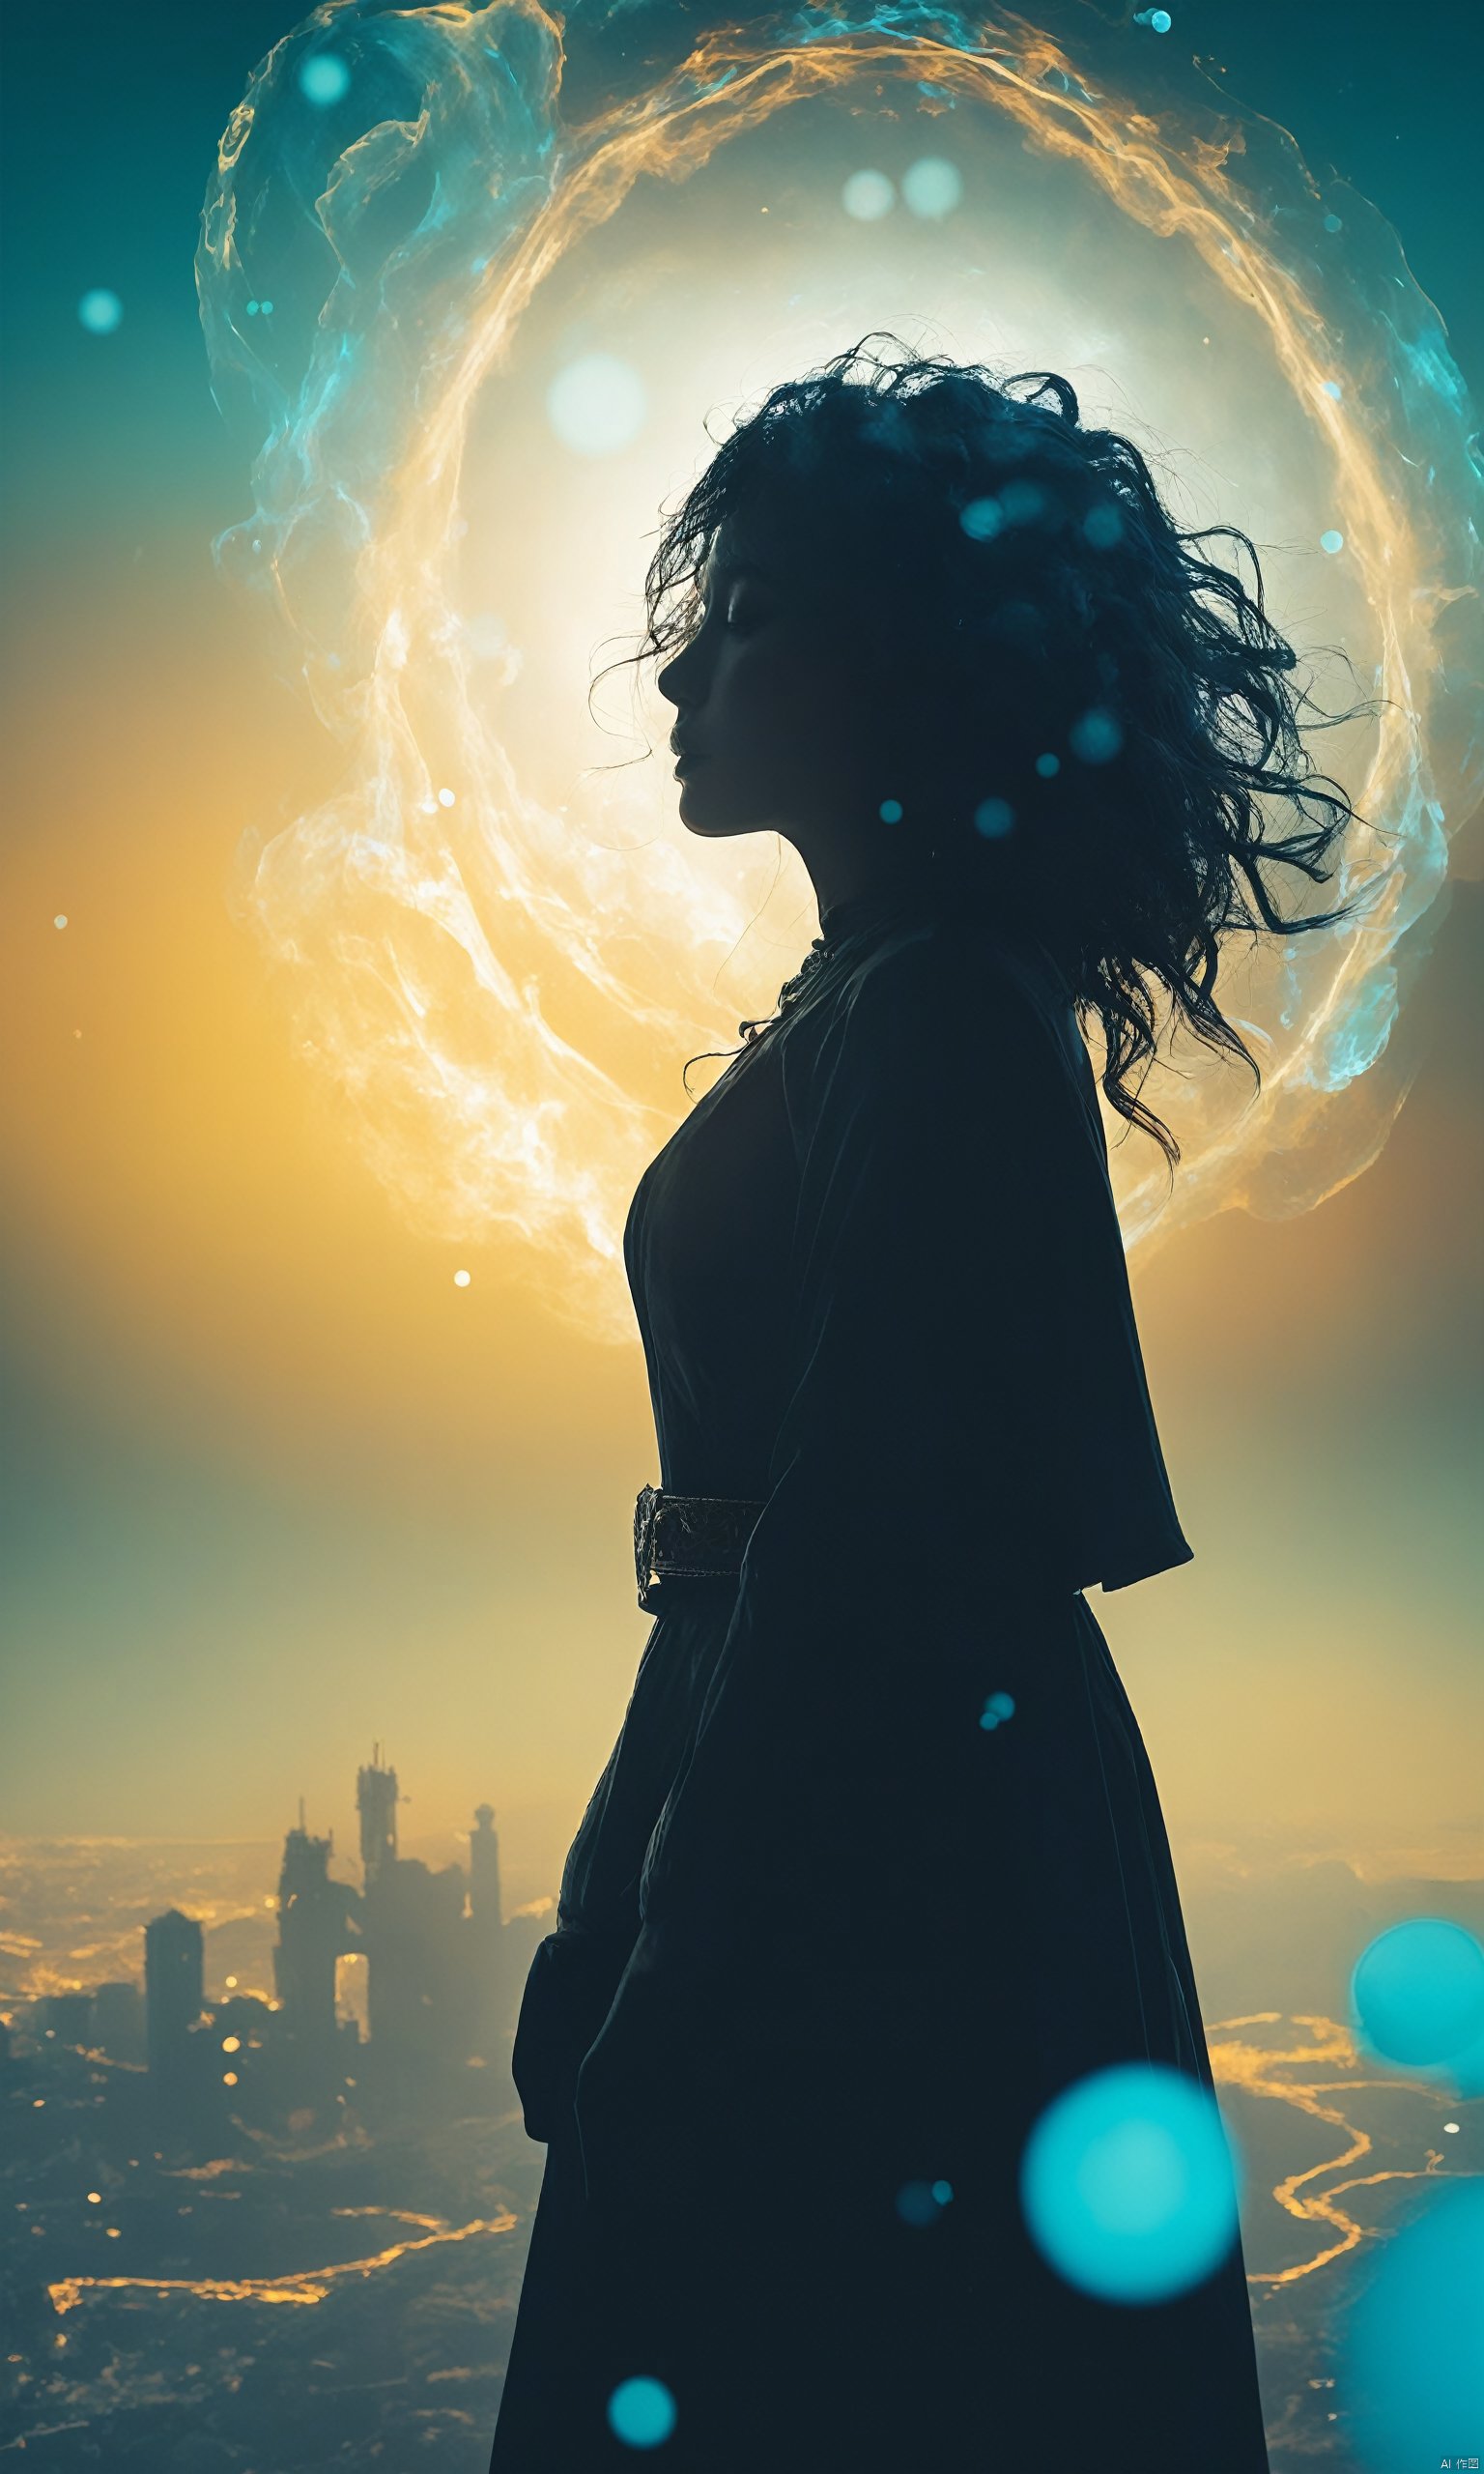 1girl, (from side), (silhouette:1.2), profile, big hair, masterpiece, best quality, light particle, depth of field, field, scenery, fantasy, indigo light, (far away:1.1), cute girl, midriff, tribal sash, pastel colors, chromatic aberration, glow in the dark dark, cloudy sky, space, orange aura, aura, cinematic, dark atmosphere, night , dark hole, glowing eyes, teal light, illumination, light rays, eye in the sky, (grass:0.9), falling petals, oniric portrait of a tall cloaked figure with a white mask, Azem the Traveler, yearning to explore the ends of the world to discover its wonders and help its denizens, by Andy Kehoe, a gradient masterpiece, blue cyan yellow, Rococopunk, luminism, seamless, China ink, Ink Bubbles, Gold leaf lines, alcohol ink elements, curved lines, cinematic, realism, chiaroscuro, Shadow play, Gold leaf small lines, bright splashes of alcohol ink puddles, volumetric light, auras, rays of sunlight, bright colors reflect, isometric, digital art, smog, pollution, toxic waste, chimneys and railroads, 3d render, octane render, volumetrics, by greg rutkowski, anime style